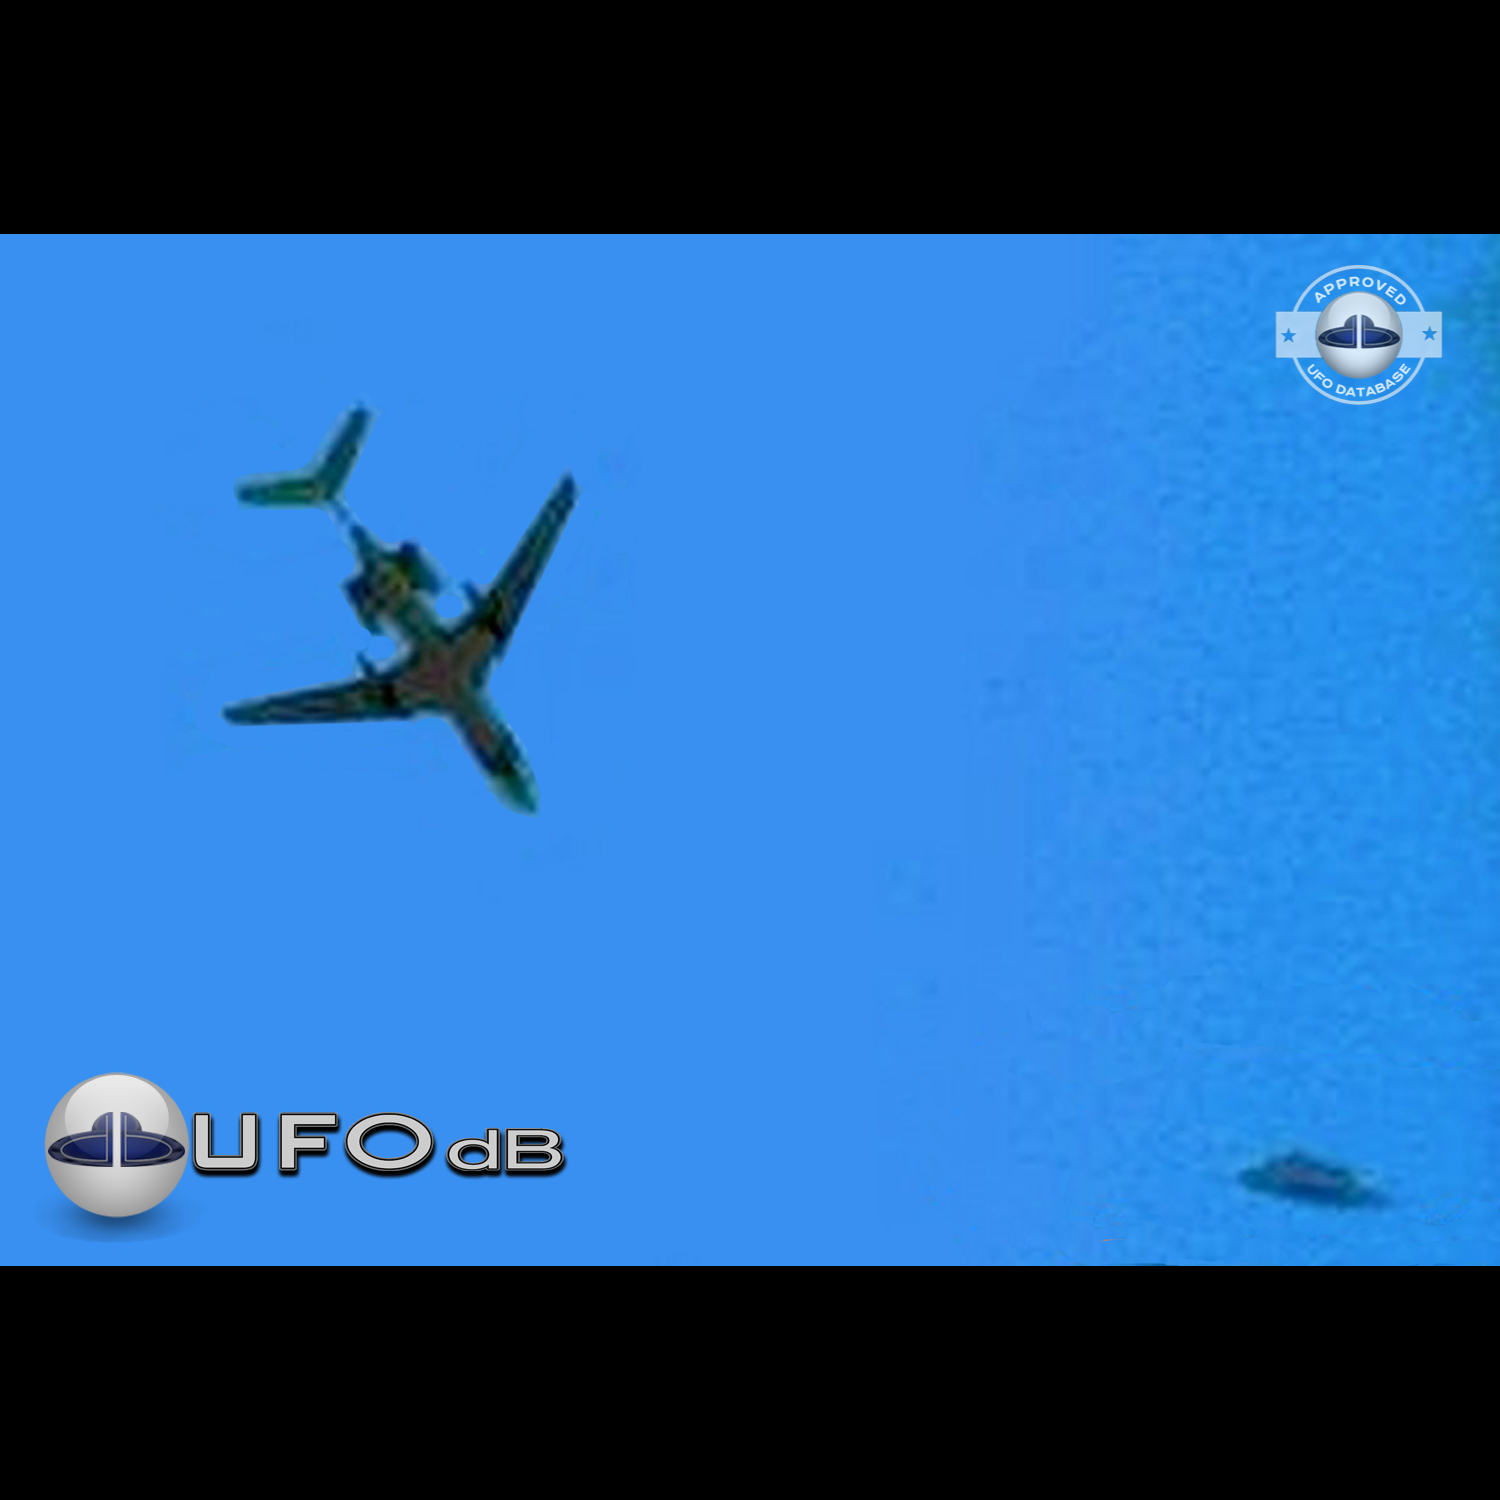 Picture of UFO near airplane over Vnukovo Airport | Moscow, Russia UFO Picture #179-1